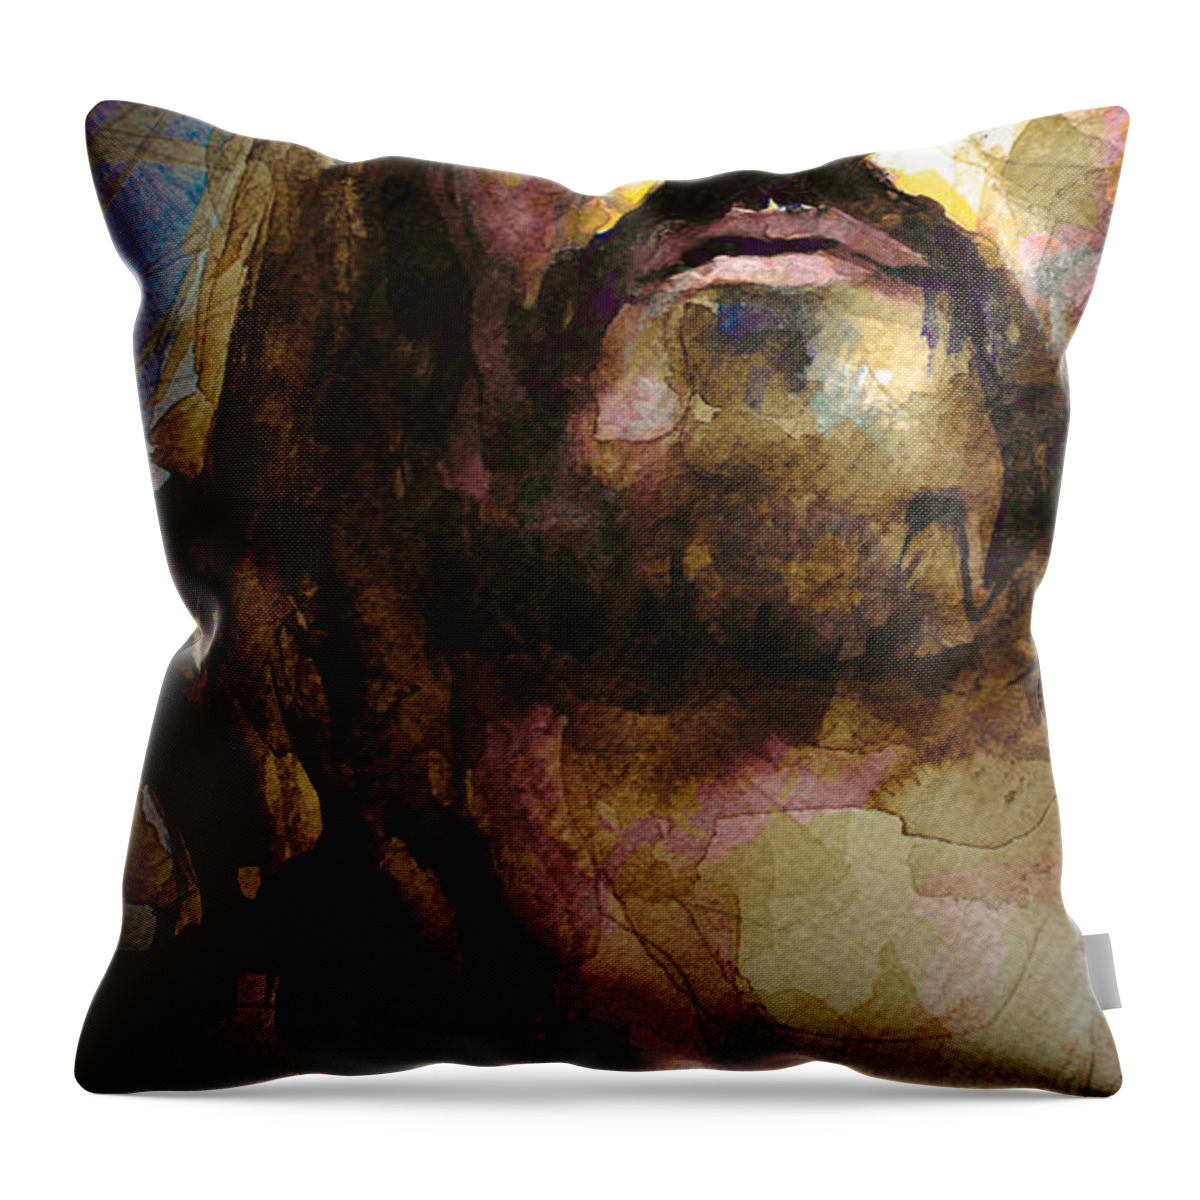 Jesus Christ Throw Pillow featuring the painting You are not alone 3 by Laur Iduc